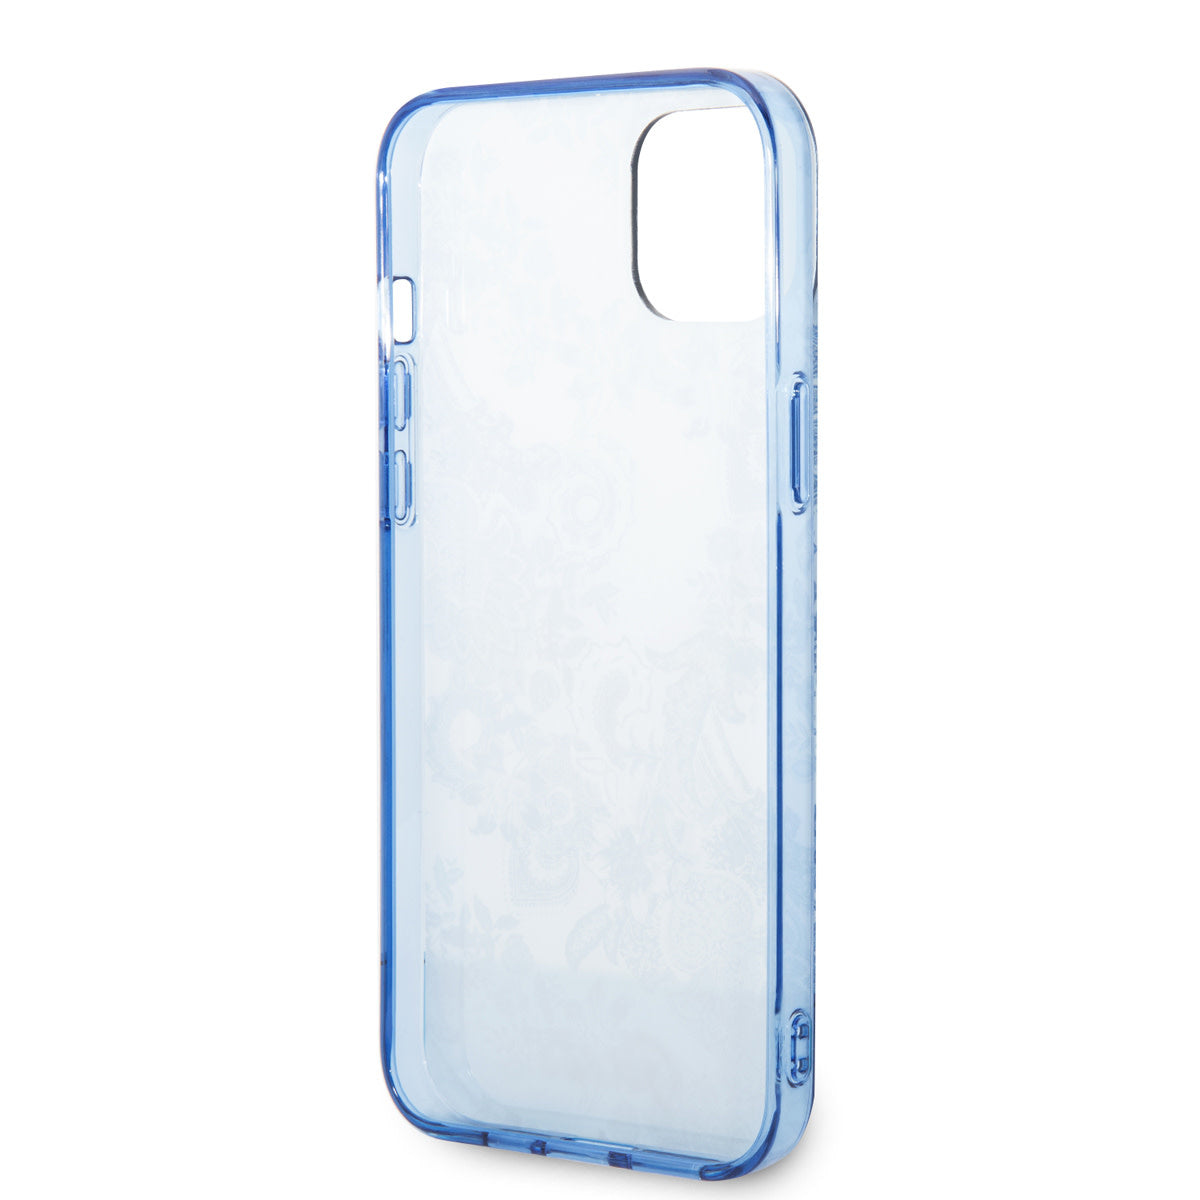 Guess iPhone 14 Backcover - Porselein Collectie - Blauw